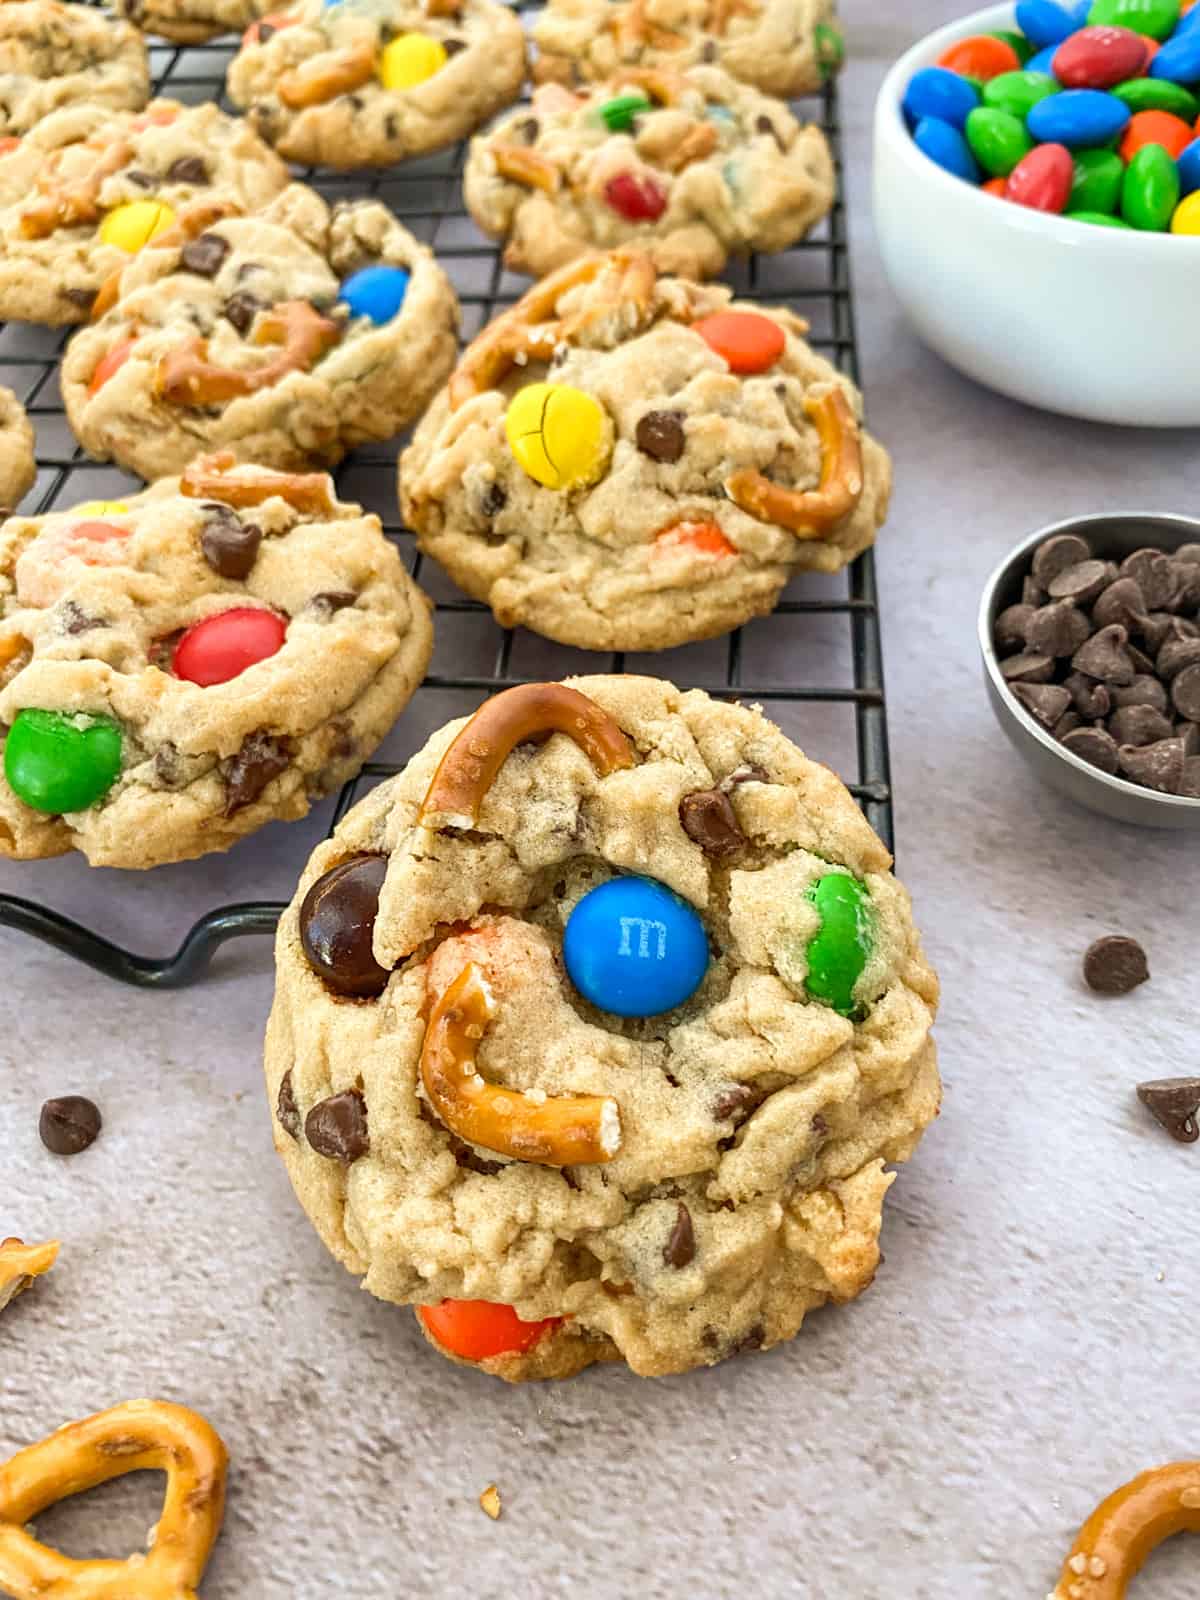 a cookie resting on a full cookie sheet with chocolate chips and a bowl of m&m's in the background